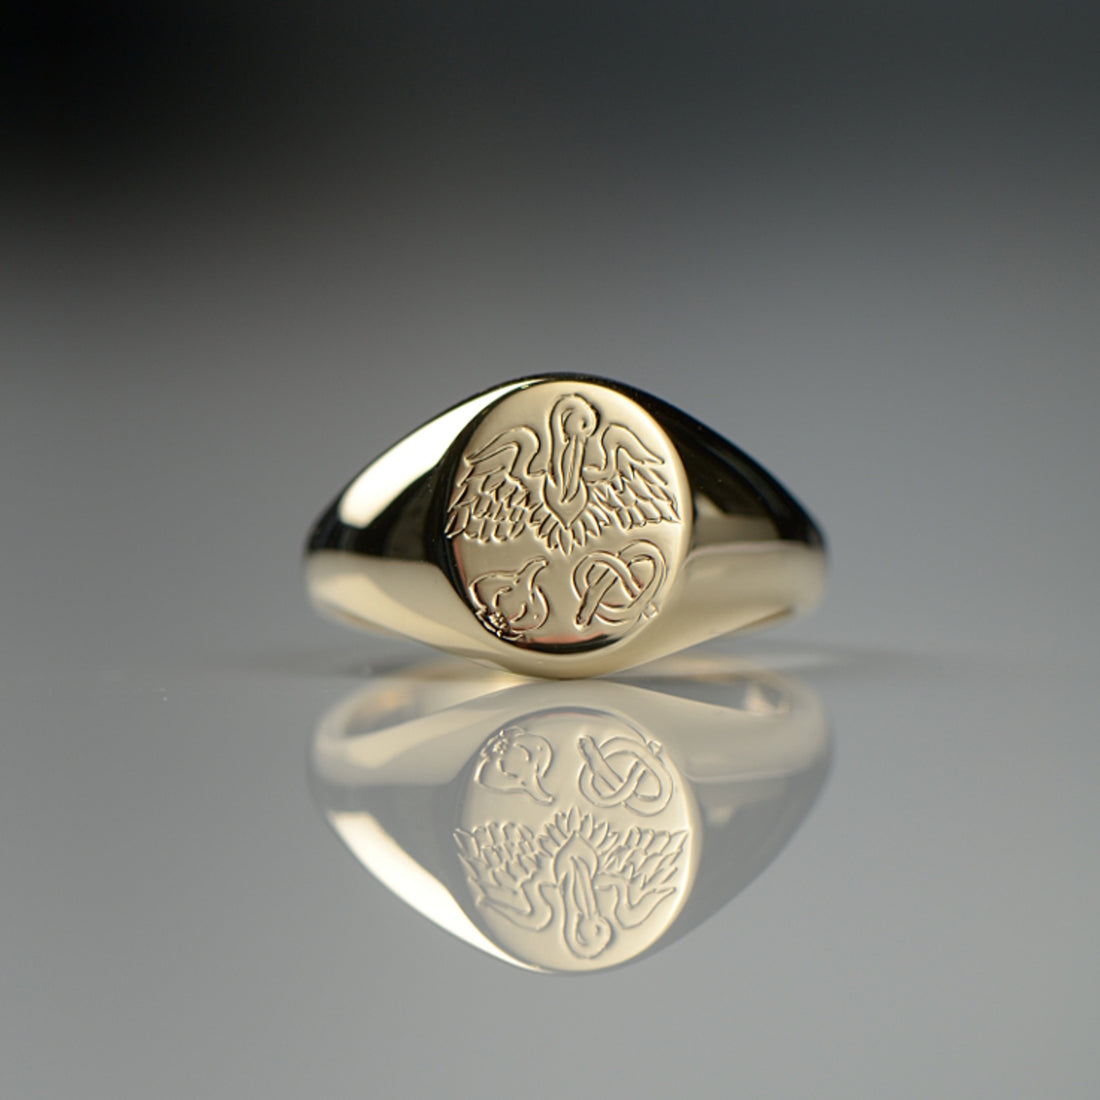 Gold signet ring with a unique family crest